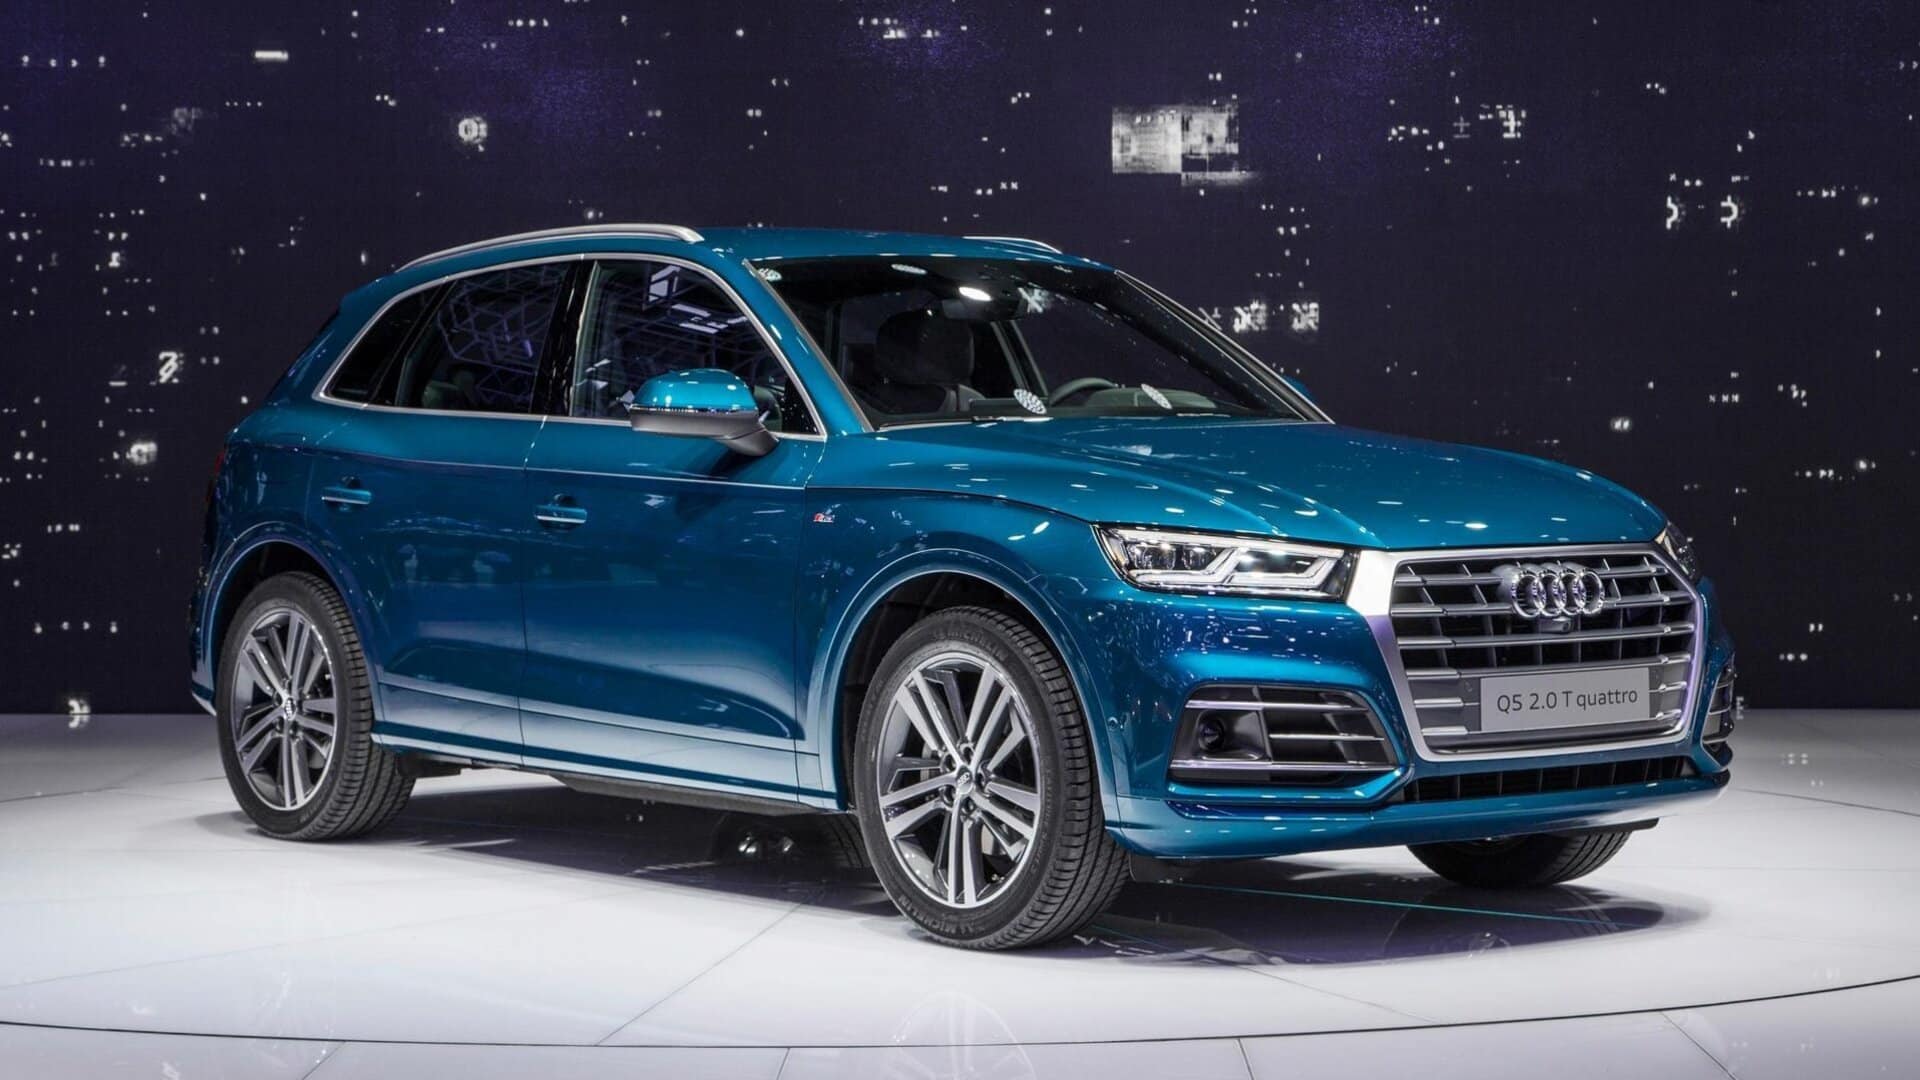 Audi keen to accelerate sales growth in India with the all-new Q5 SUV